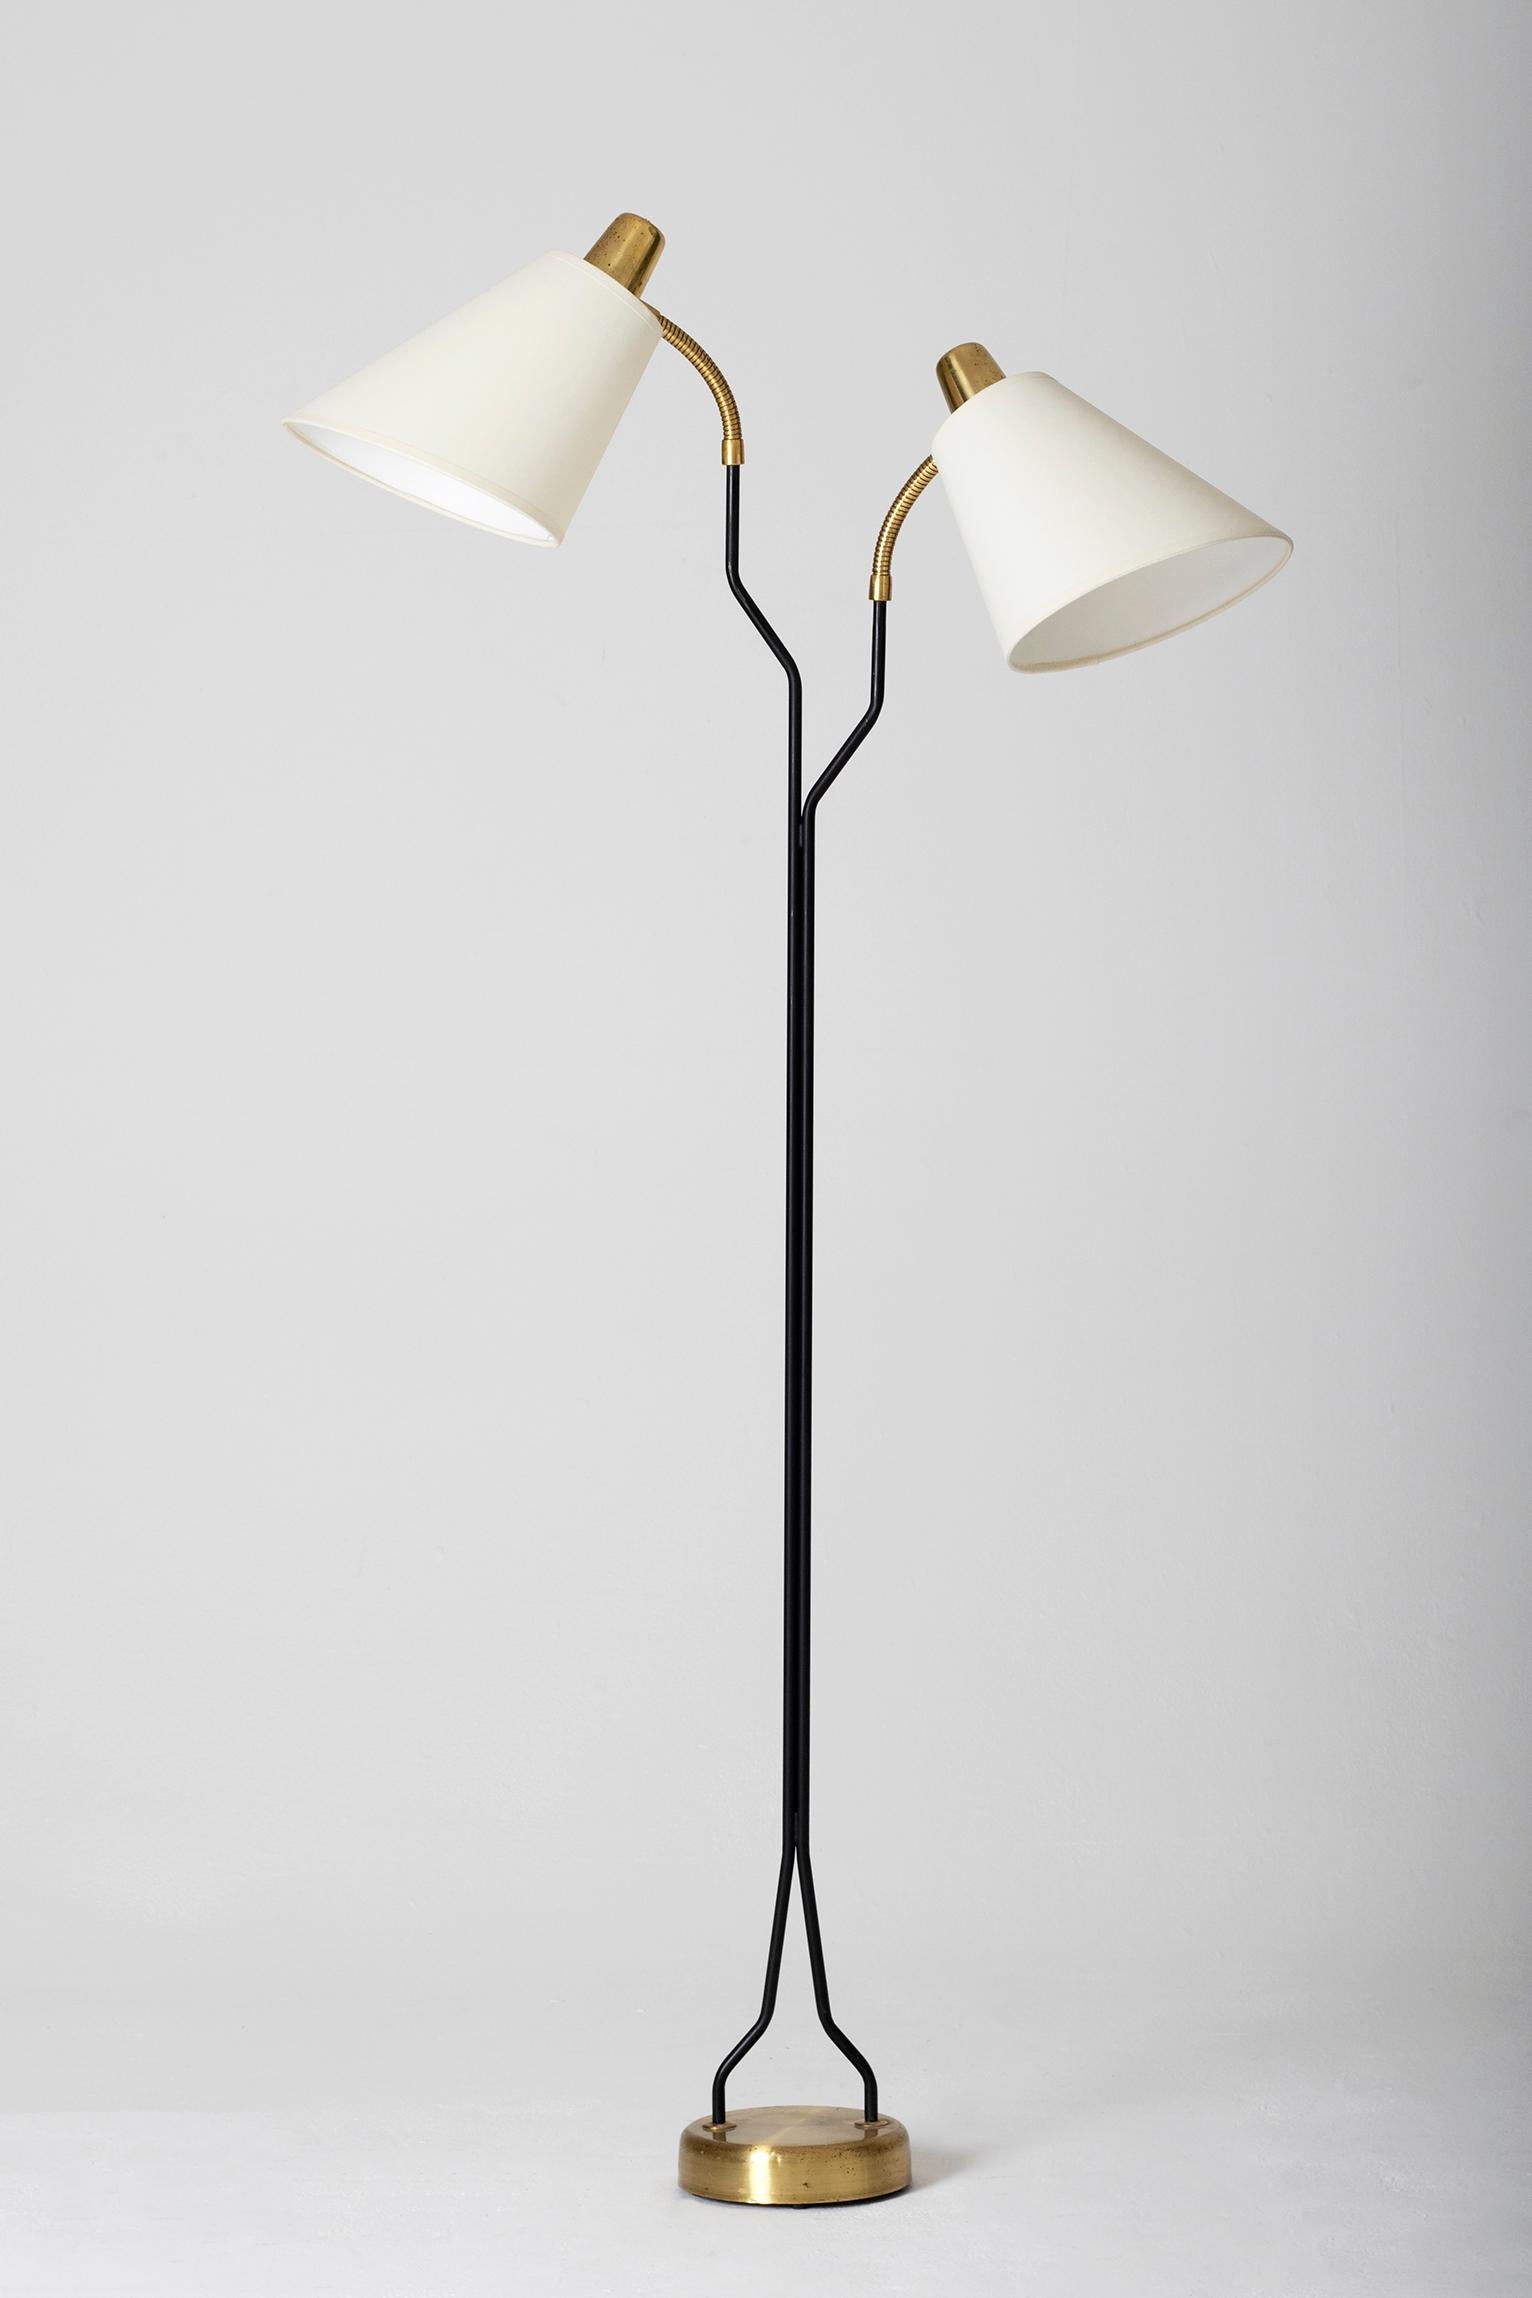 A brass and black enamelled iron two-arm floor lamp, with bespoke shades
Sweden, circa 1950
Height 147 cm, width including the shade 70 cm, diameter of the brass base 18 cm.